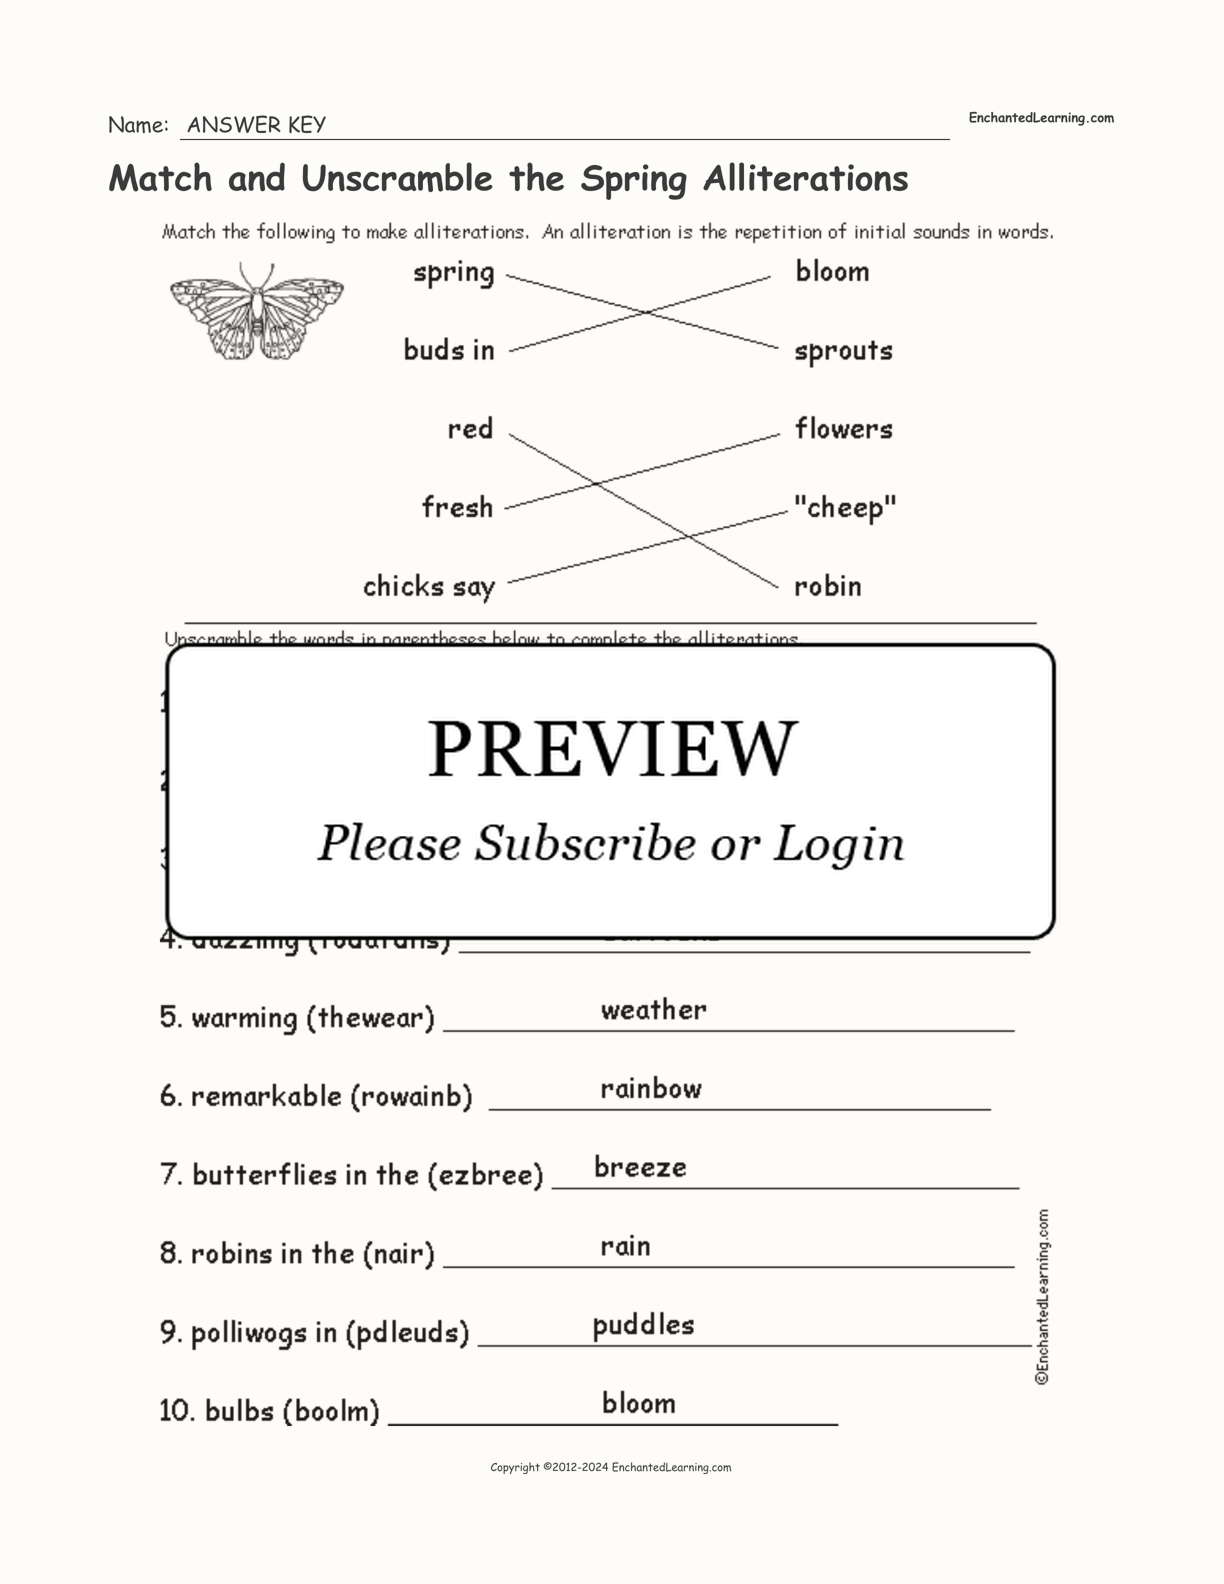 Match and Unscramble the Spring Alliterations interactive worksheet page 2